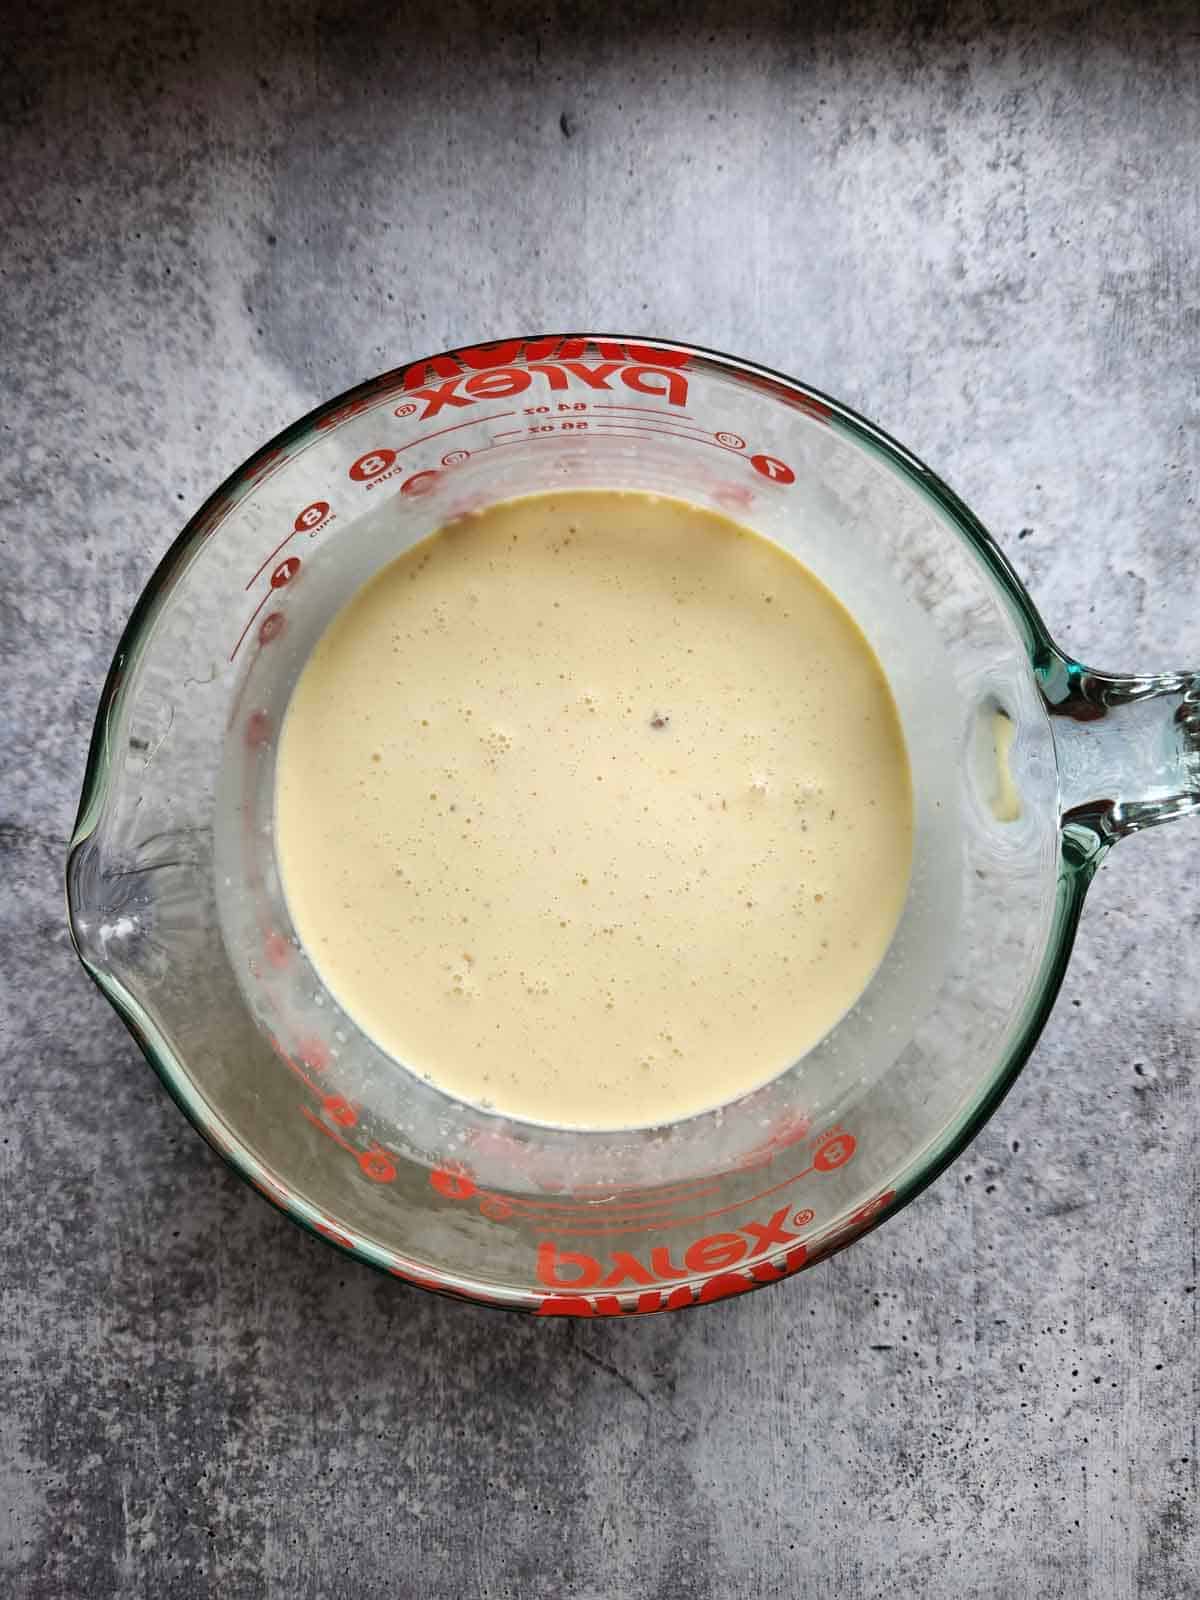 Mixed ice cream batter in a clear bowl.